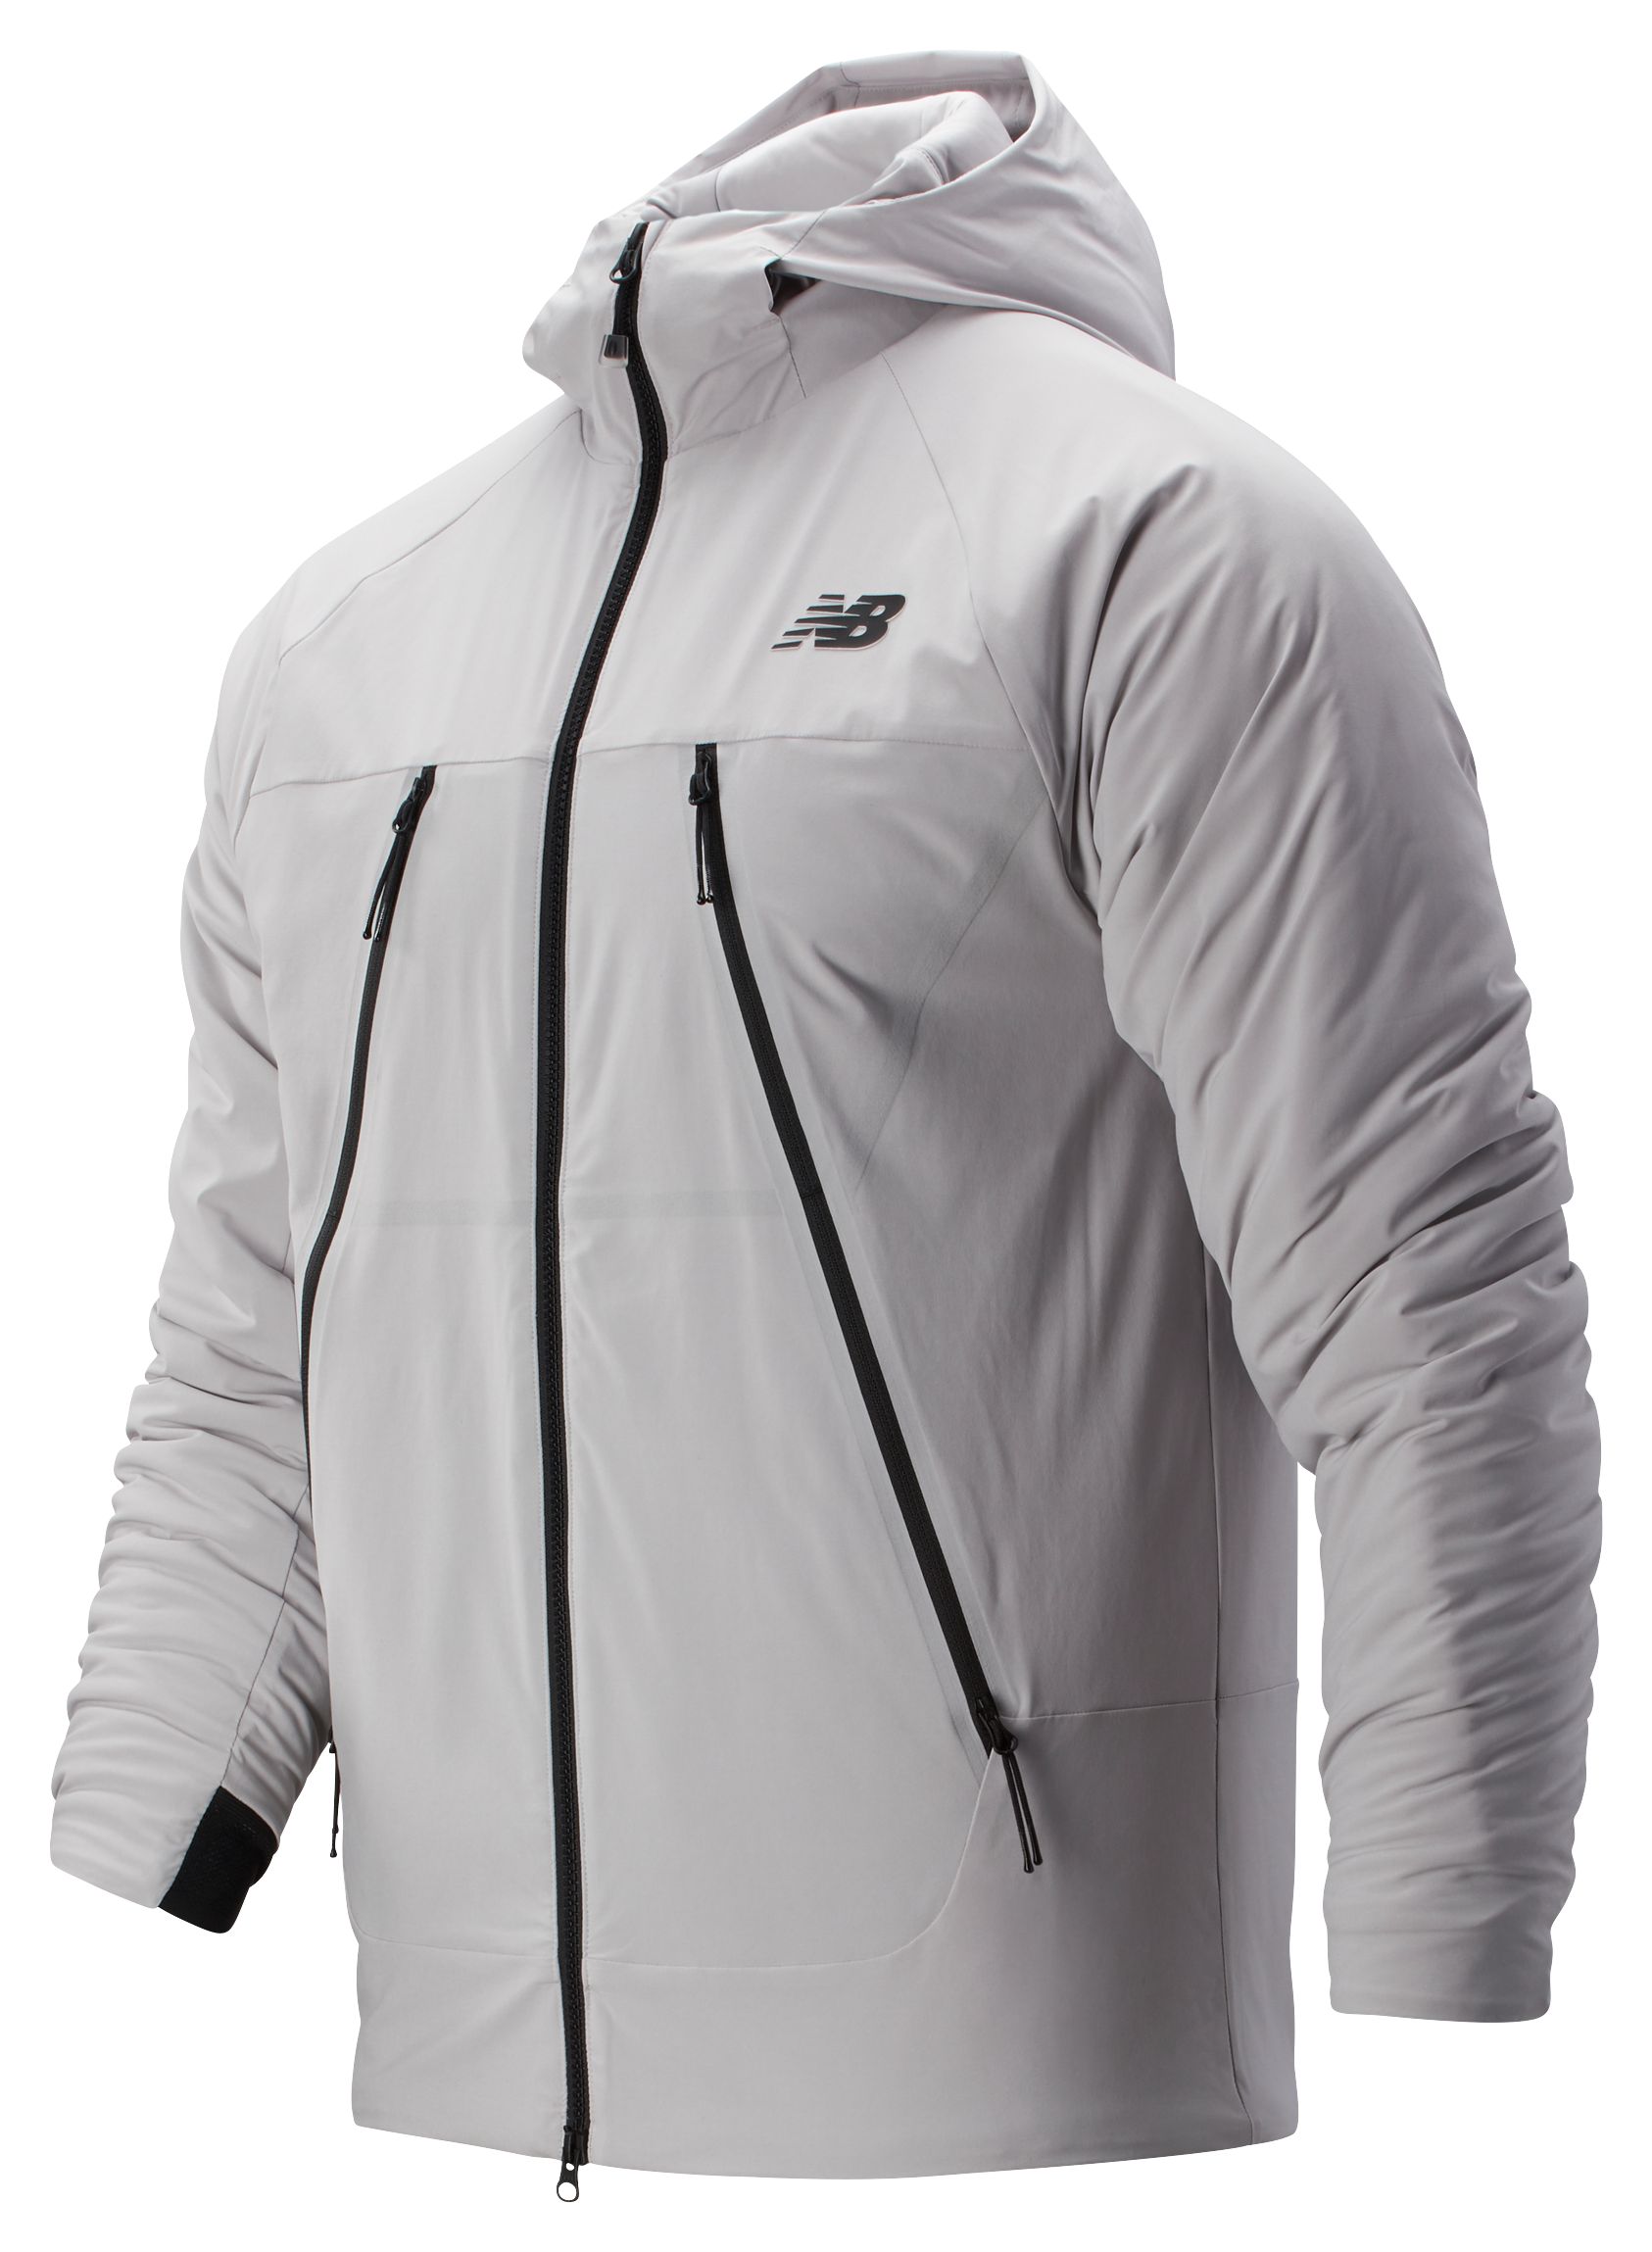 new balance men's all motion printed 4 way stretch jacket